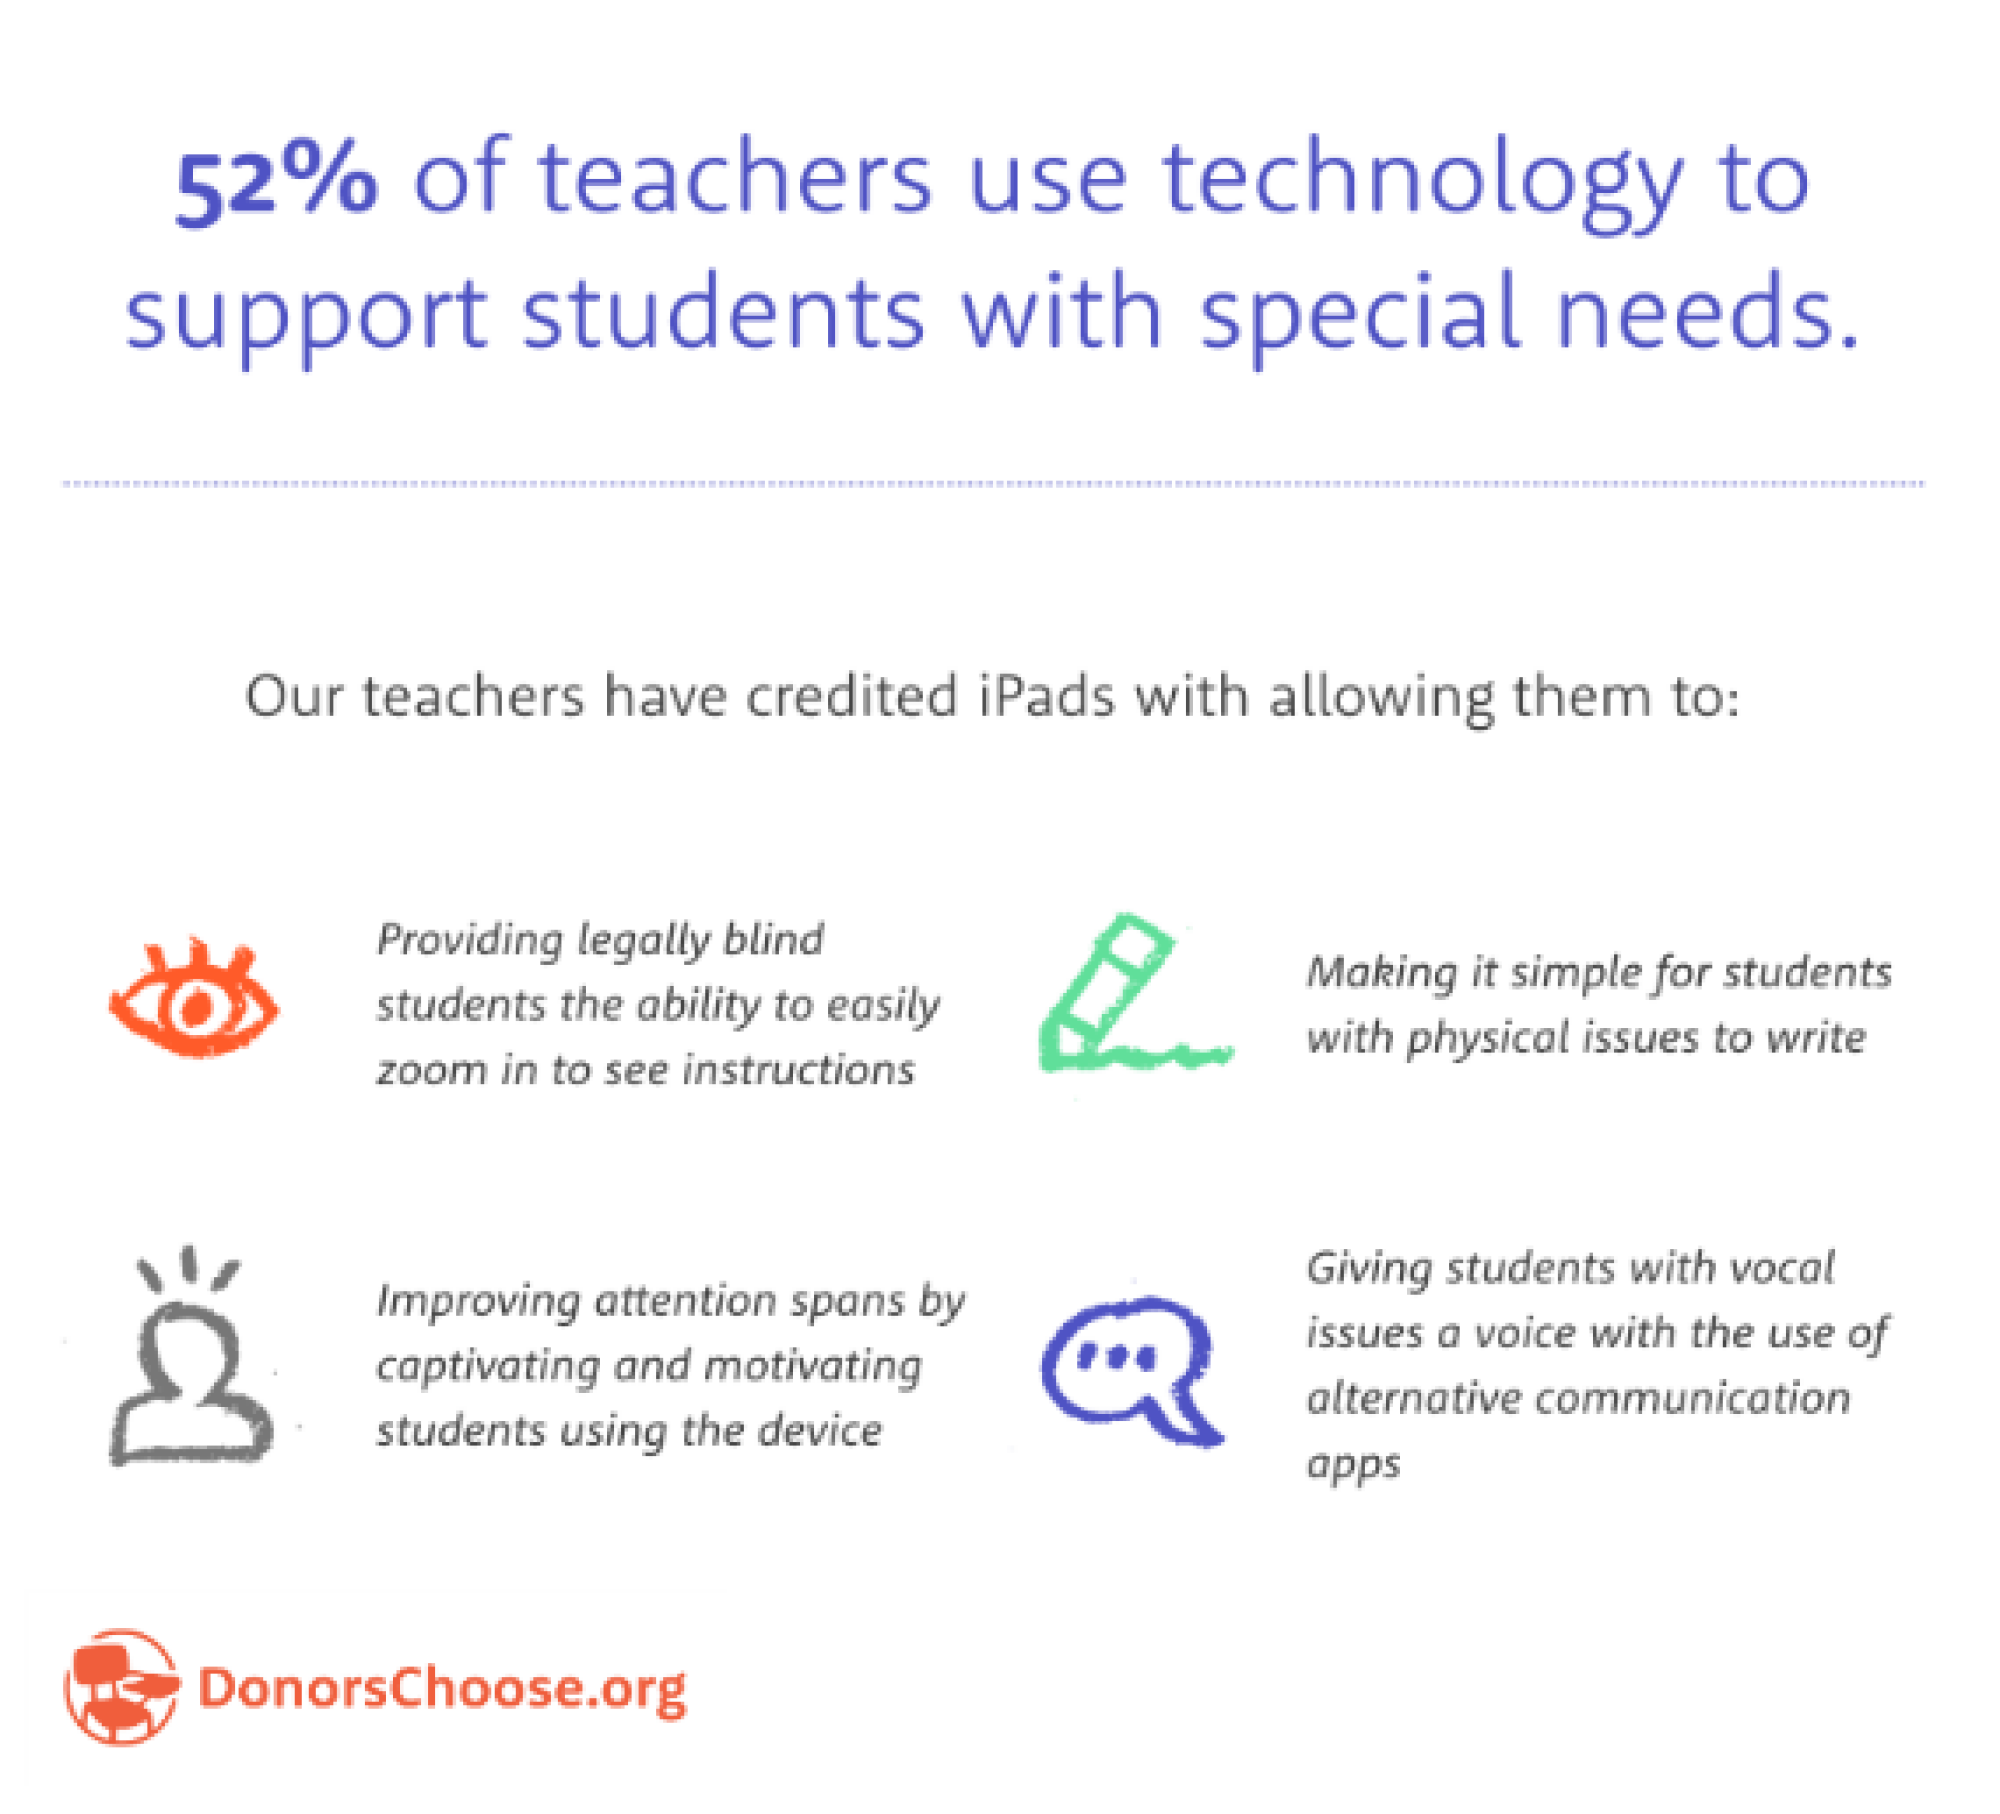 An infographic describing the use of technology in classrooms. It reads, "52% of teachers use technology to support students with special needs. Our teachers have credited iPad's with allowing them to: provide legally blind students the ability to easily zoom in to see instructions; make it simple for students with physical issues to write; improving attention spans by captivating and motivating students using the device; and giving students with vocal issues a voice with the use of alternative communication apps."  